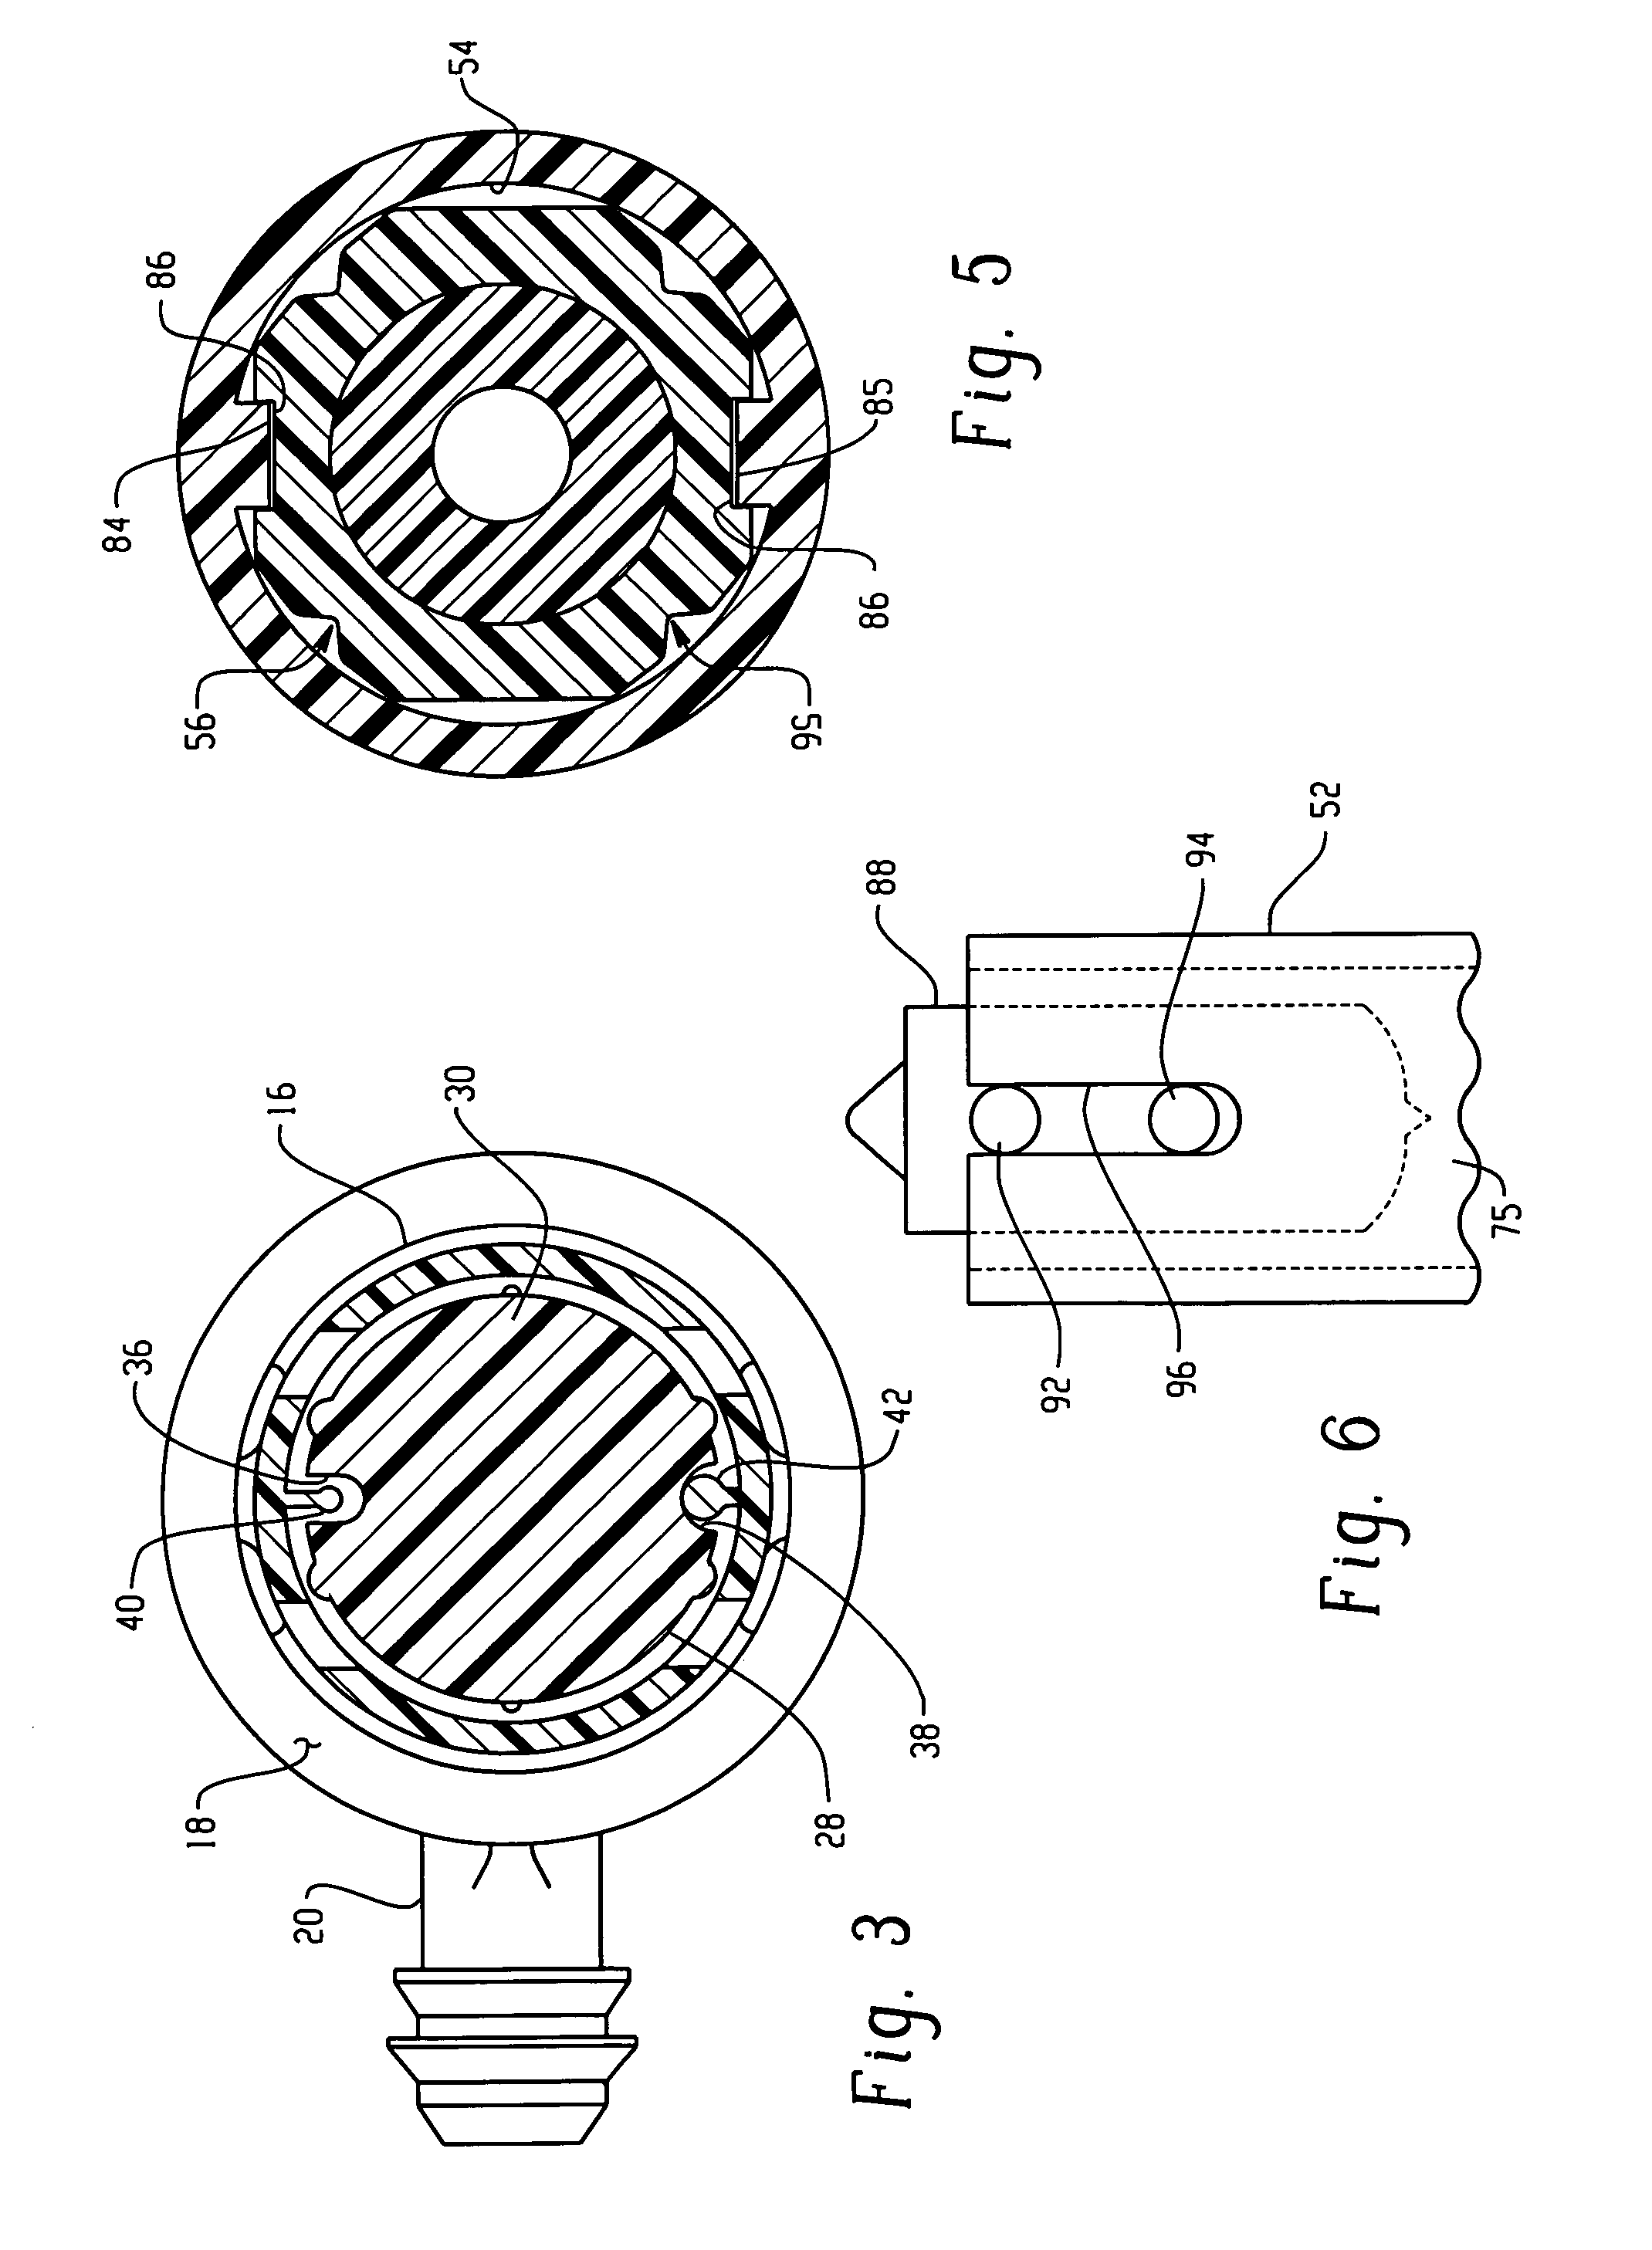 Fuel vapor vent valve and method of attaching same to a tank